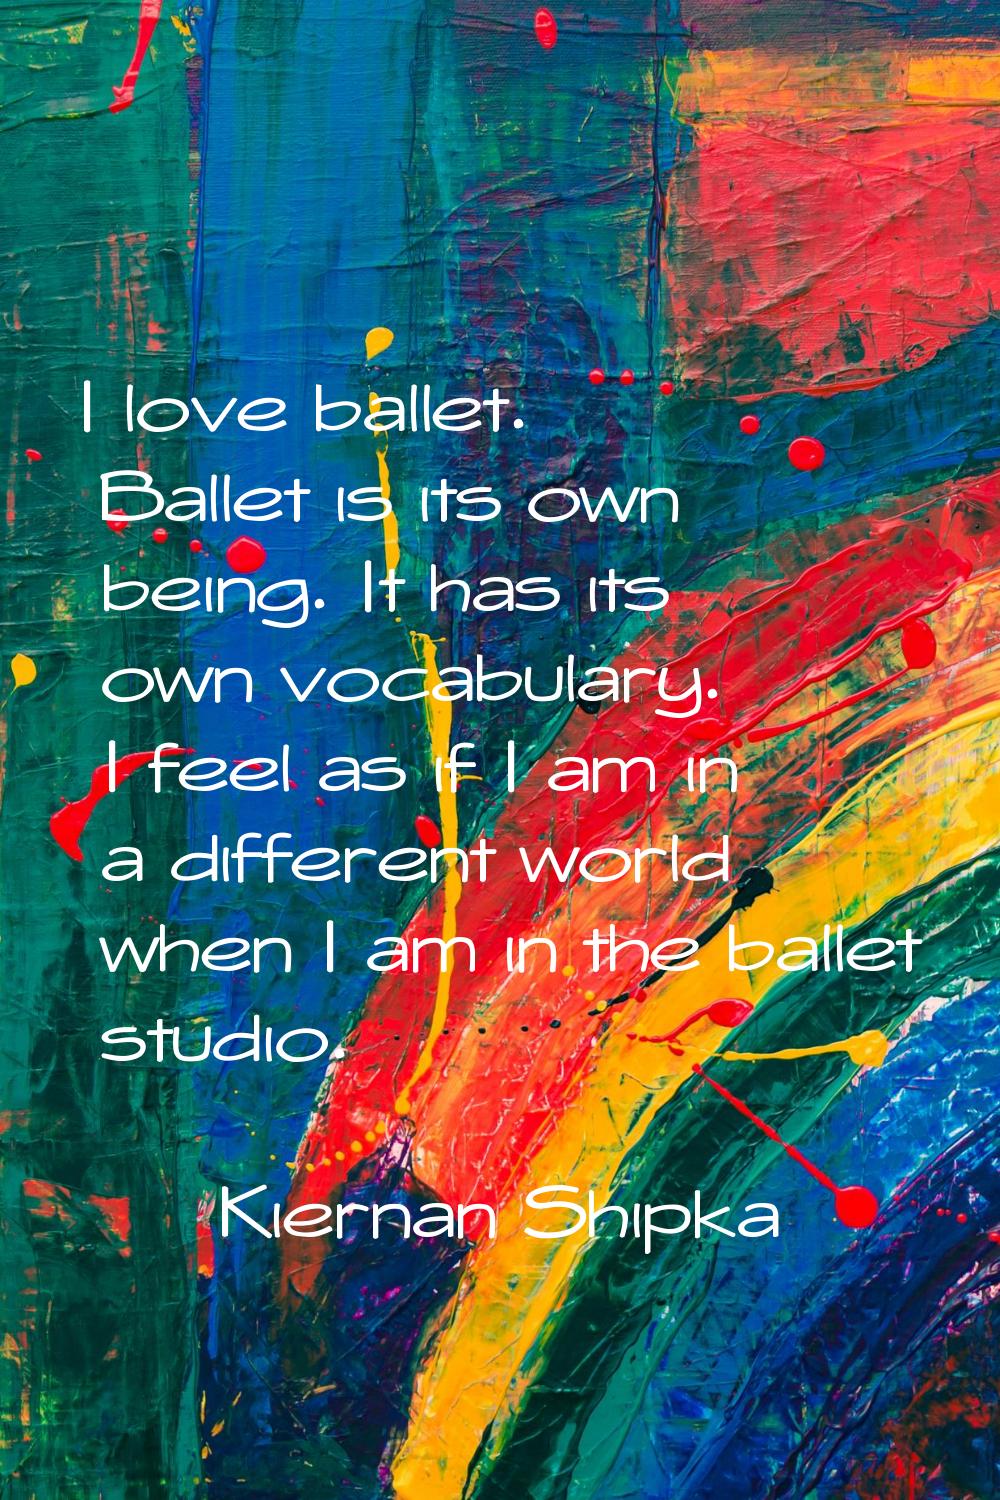 I love ballet. Ballet is its own being. It has its own vocabulary. I feel as if I am in a different